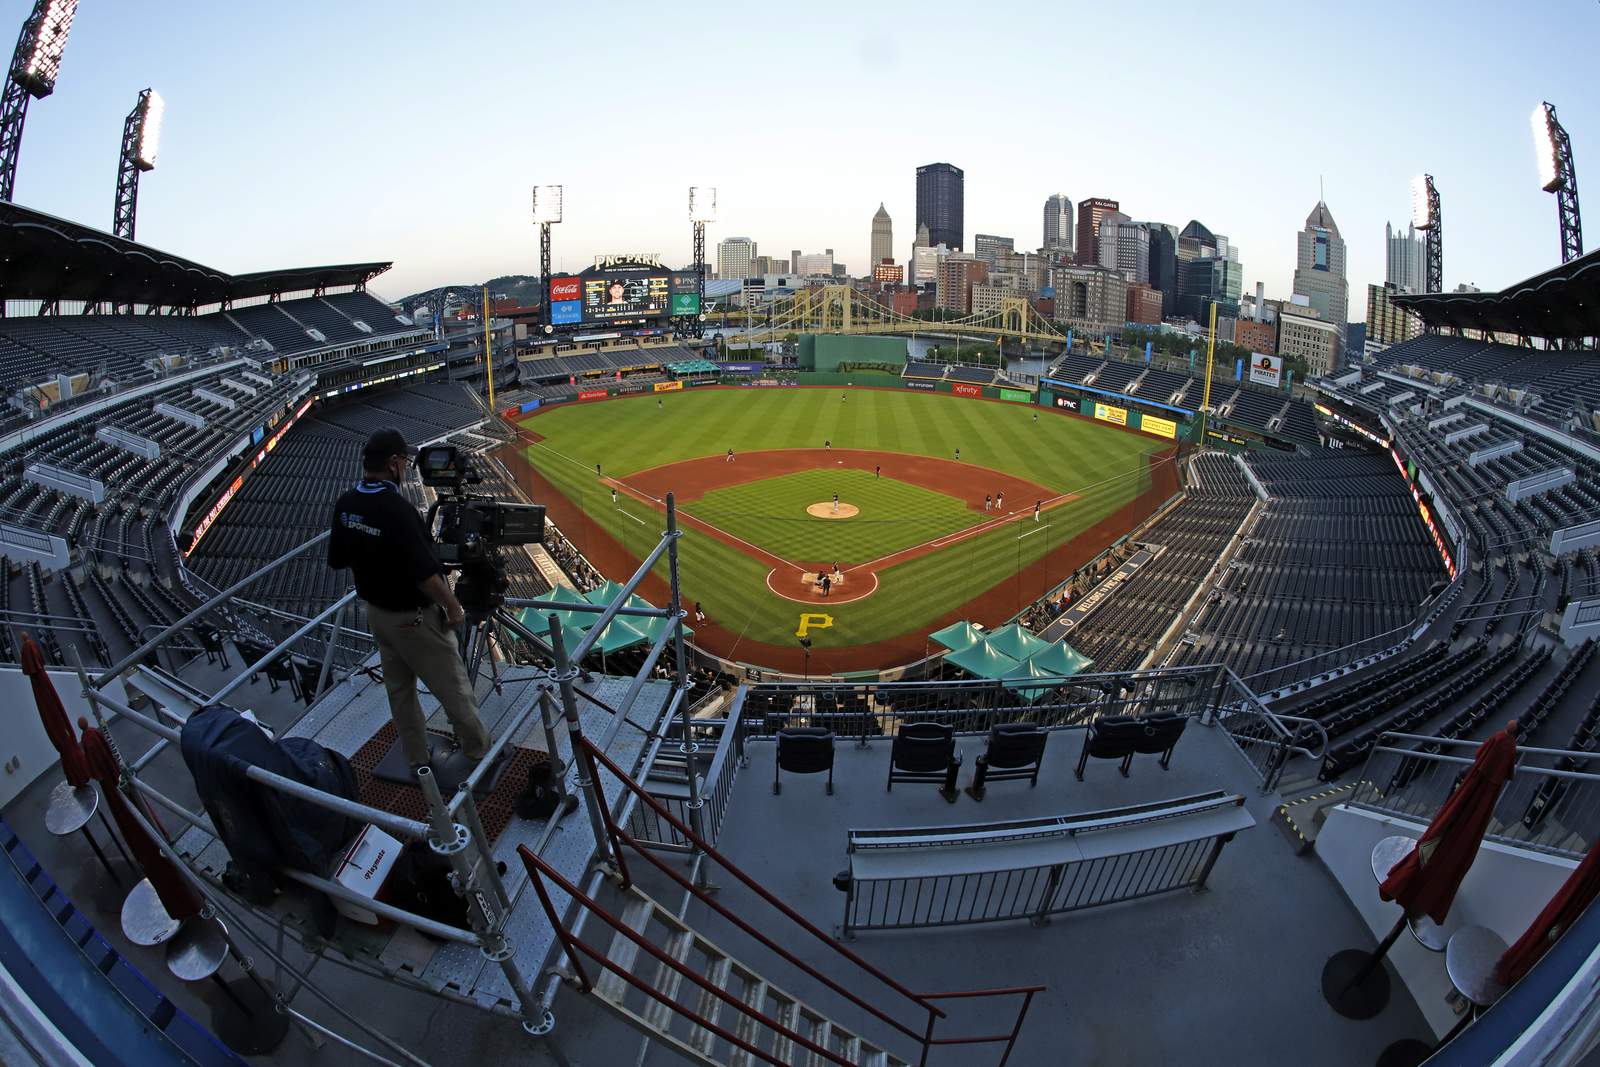 AP sources: Blue Jays to play in Pittsburgh if Pa. approves